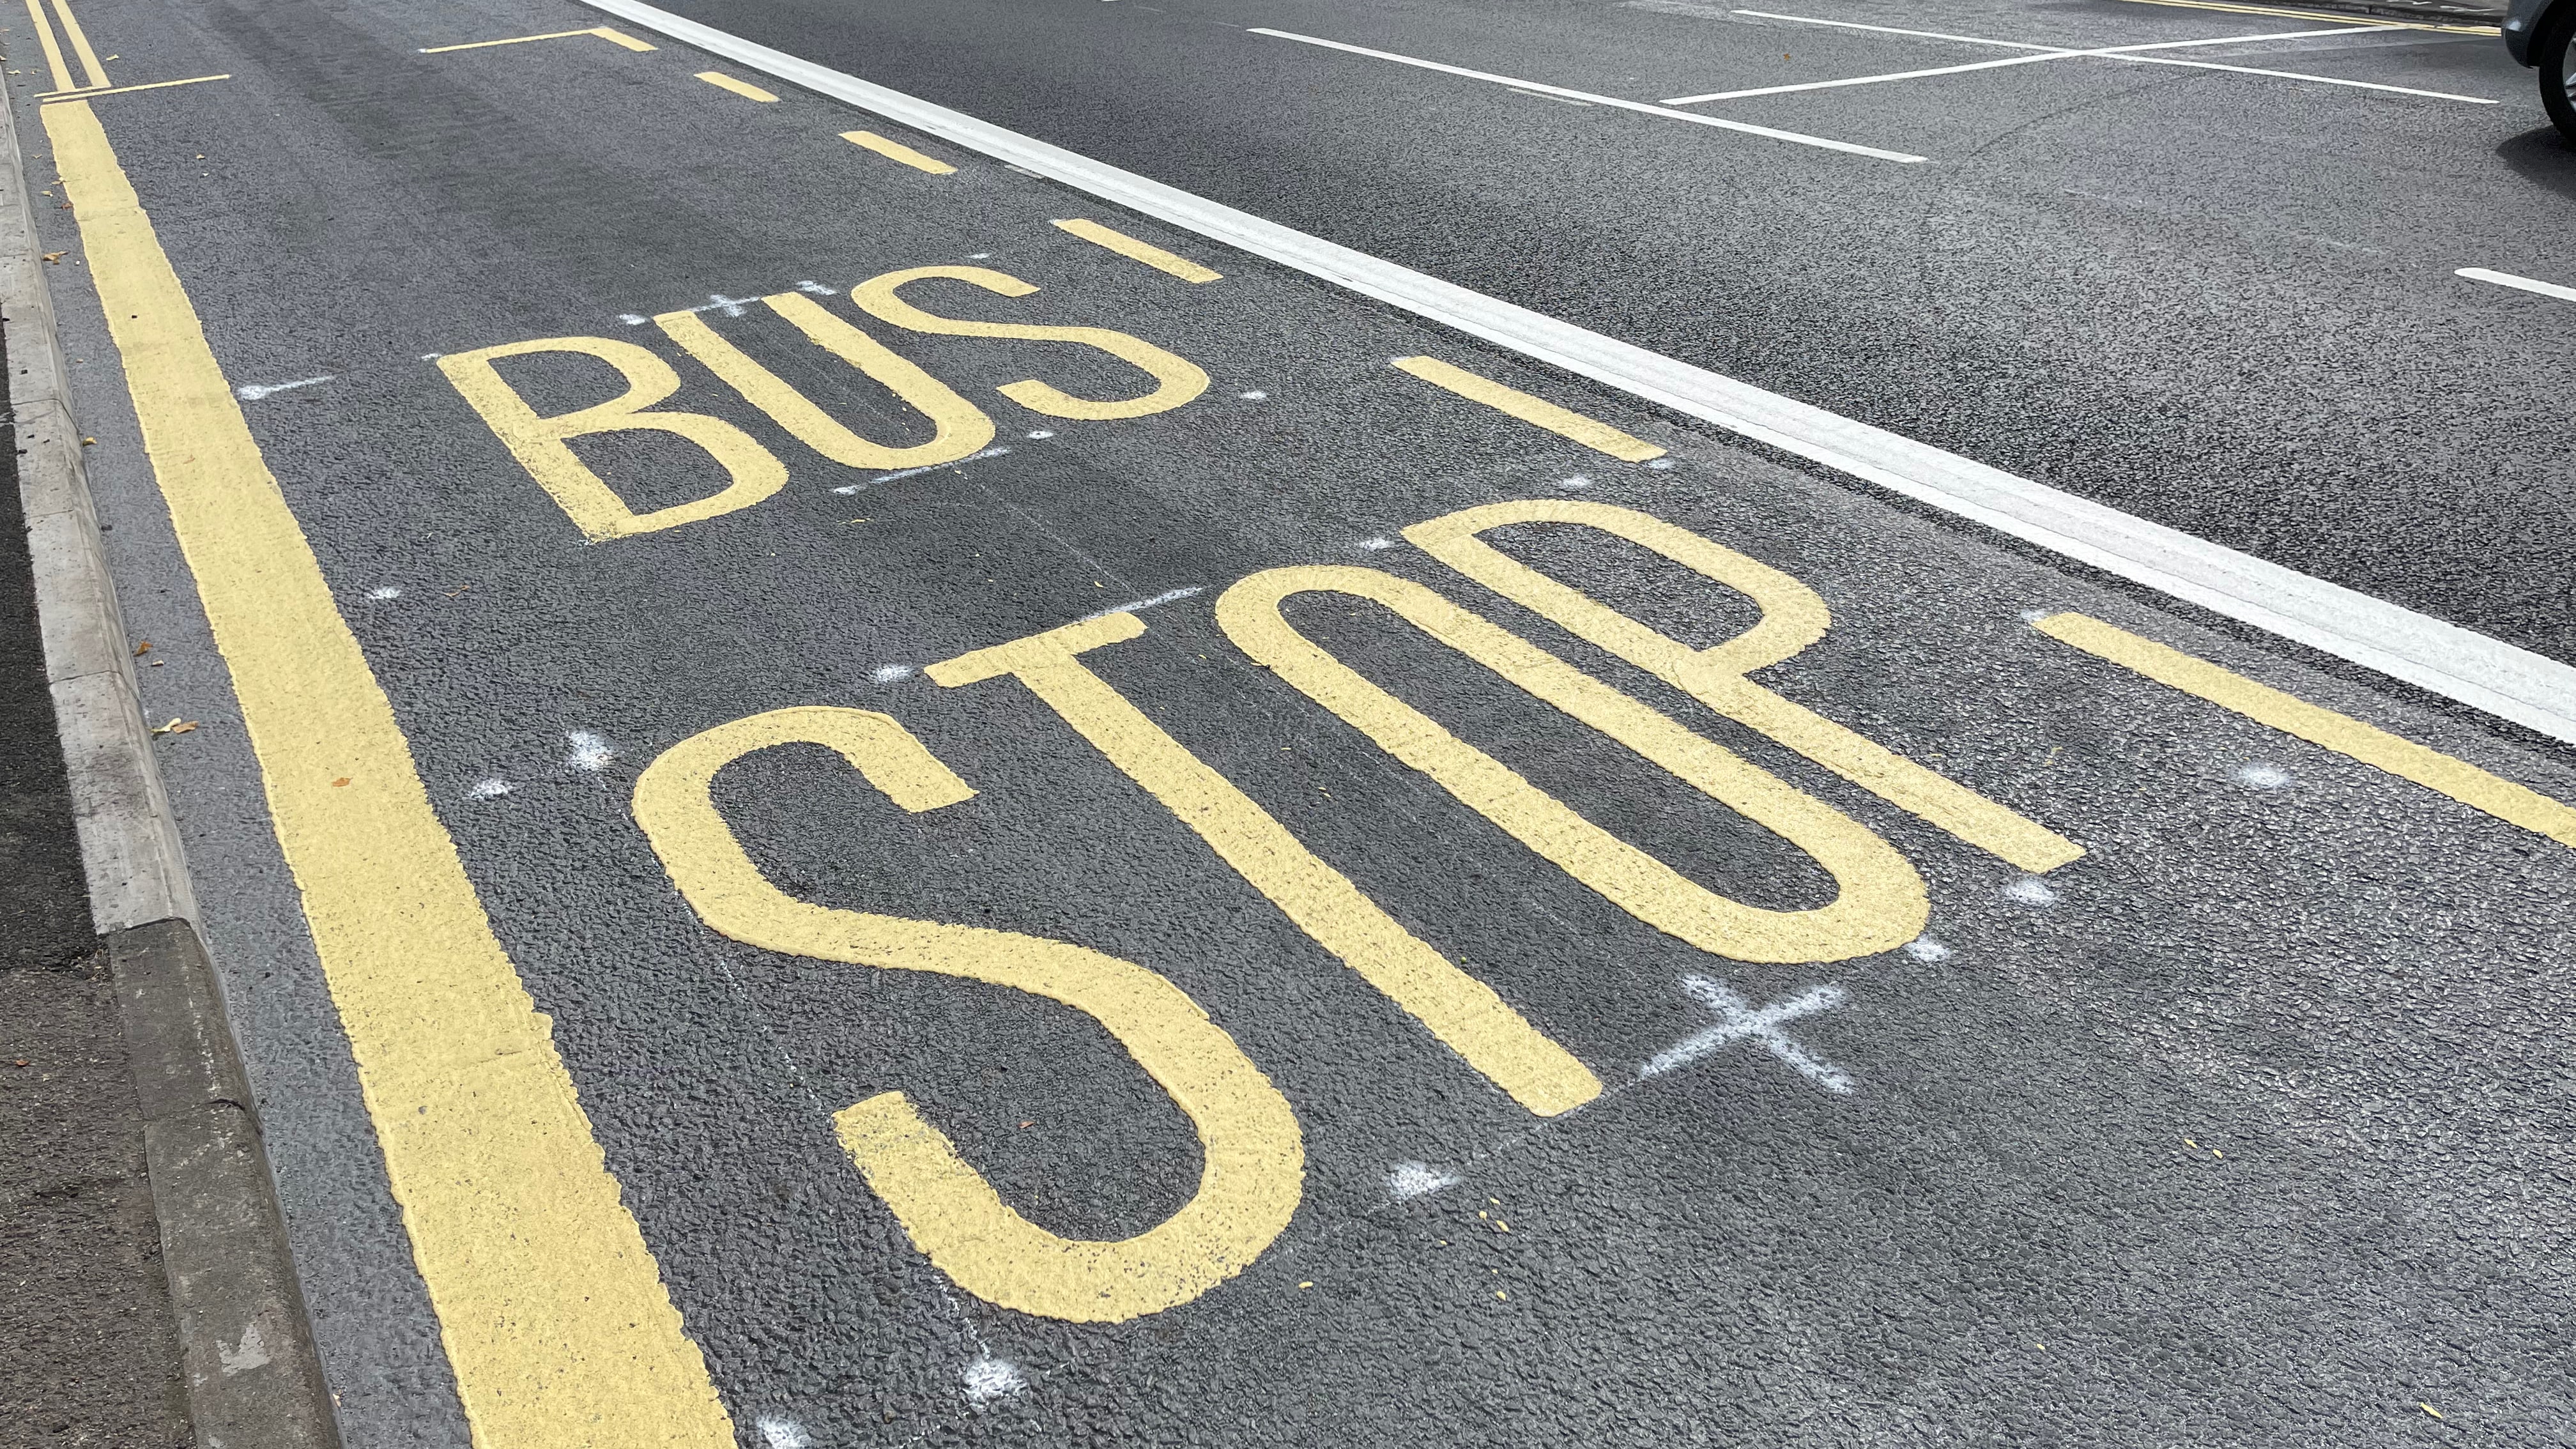 Bus stop in yellow